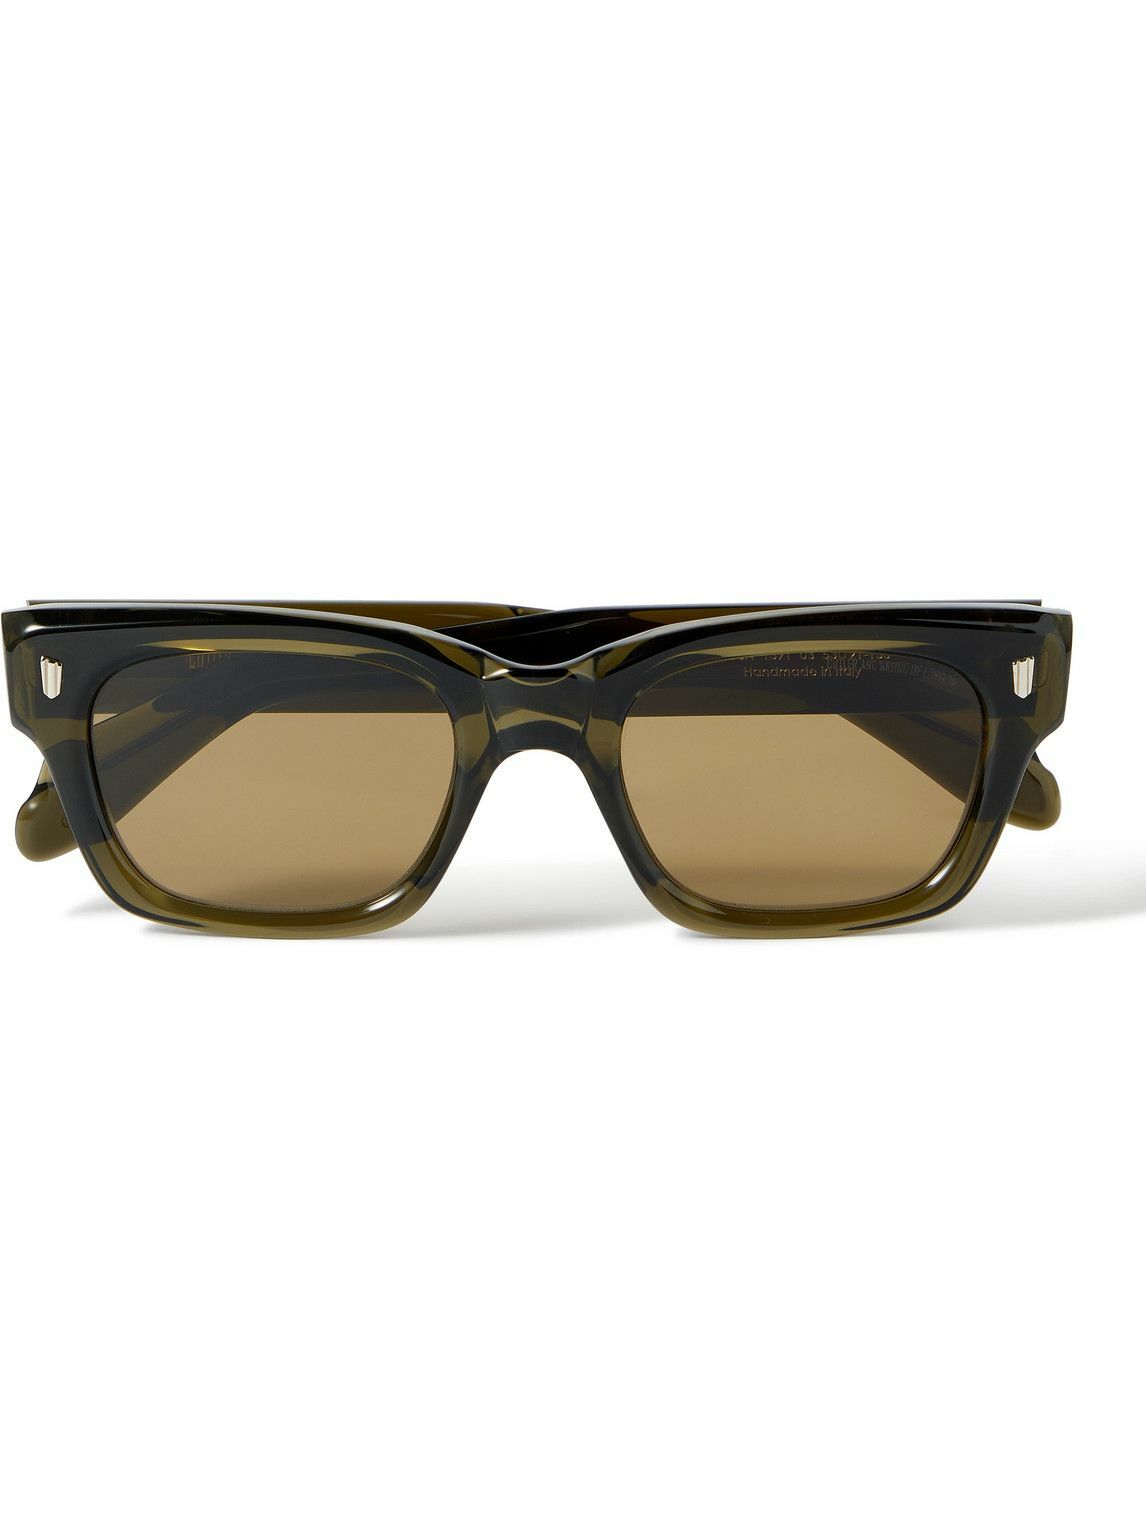 Cutler and Gross - 1391 Square-Frame Acetate Sunglasses Cutler and Gross